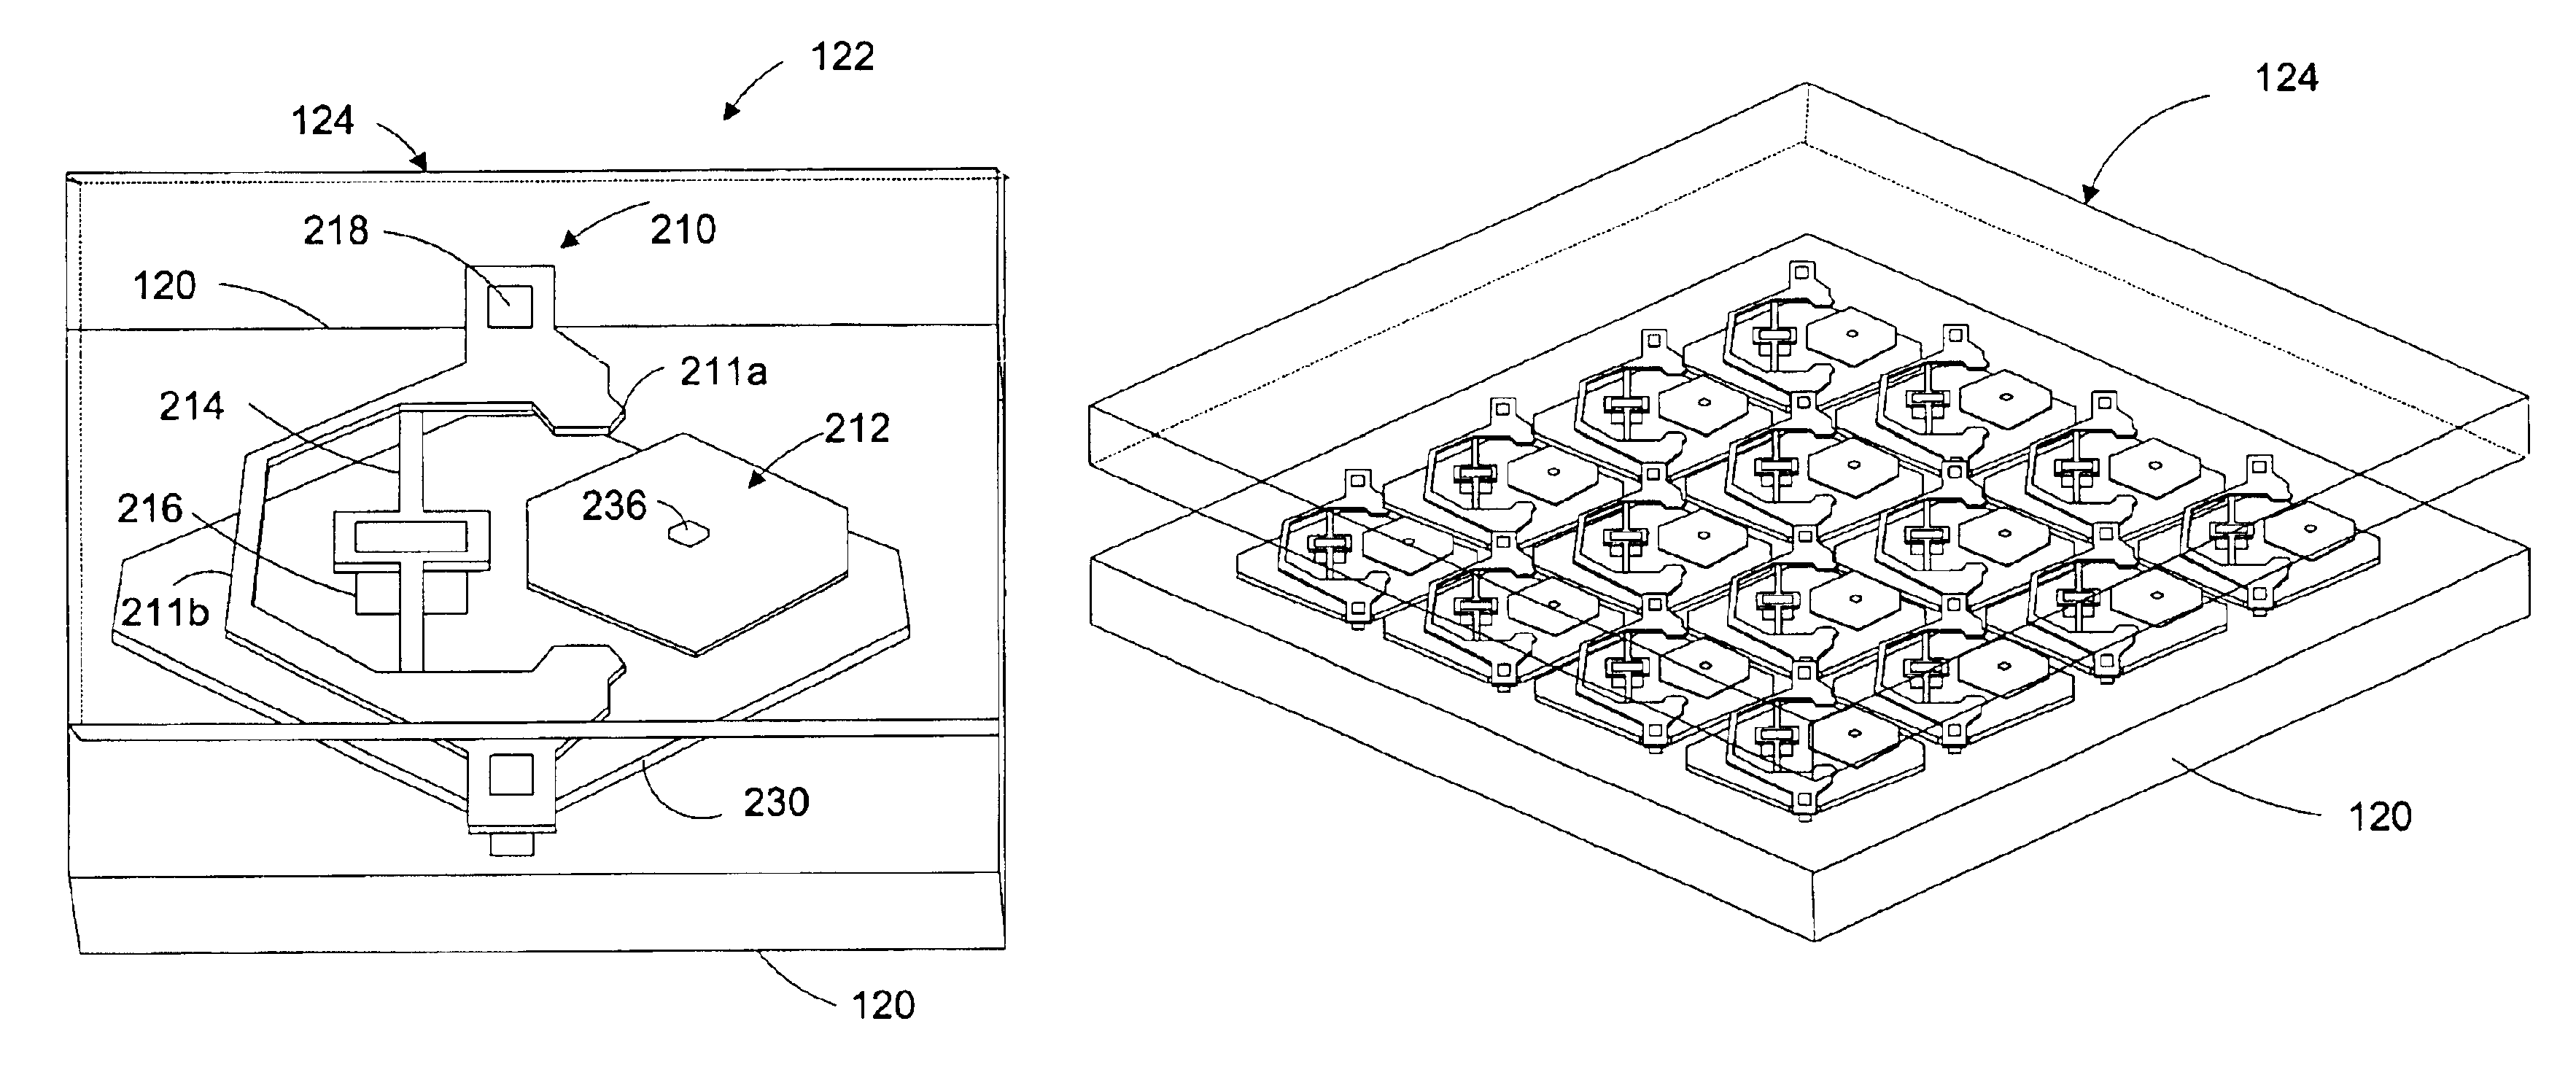 Micromirrors with mechanisms for enhancing coupling of the micromirrors with electrostatic fields